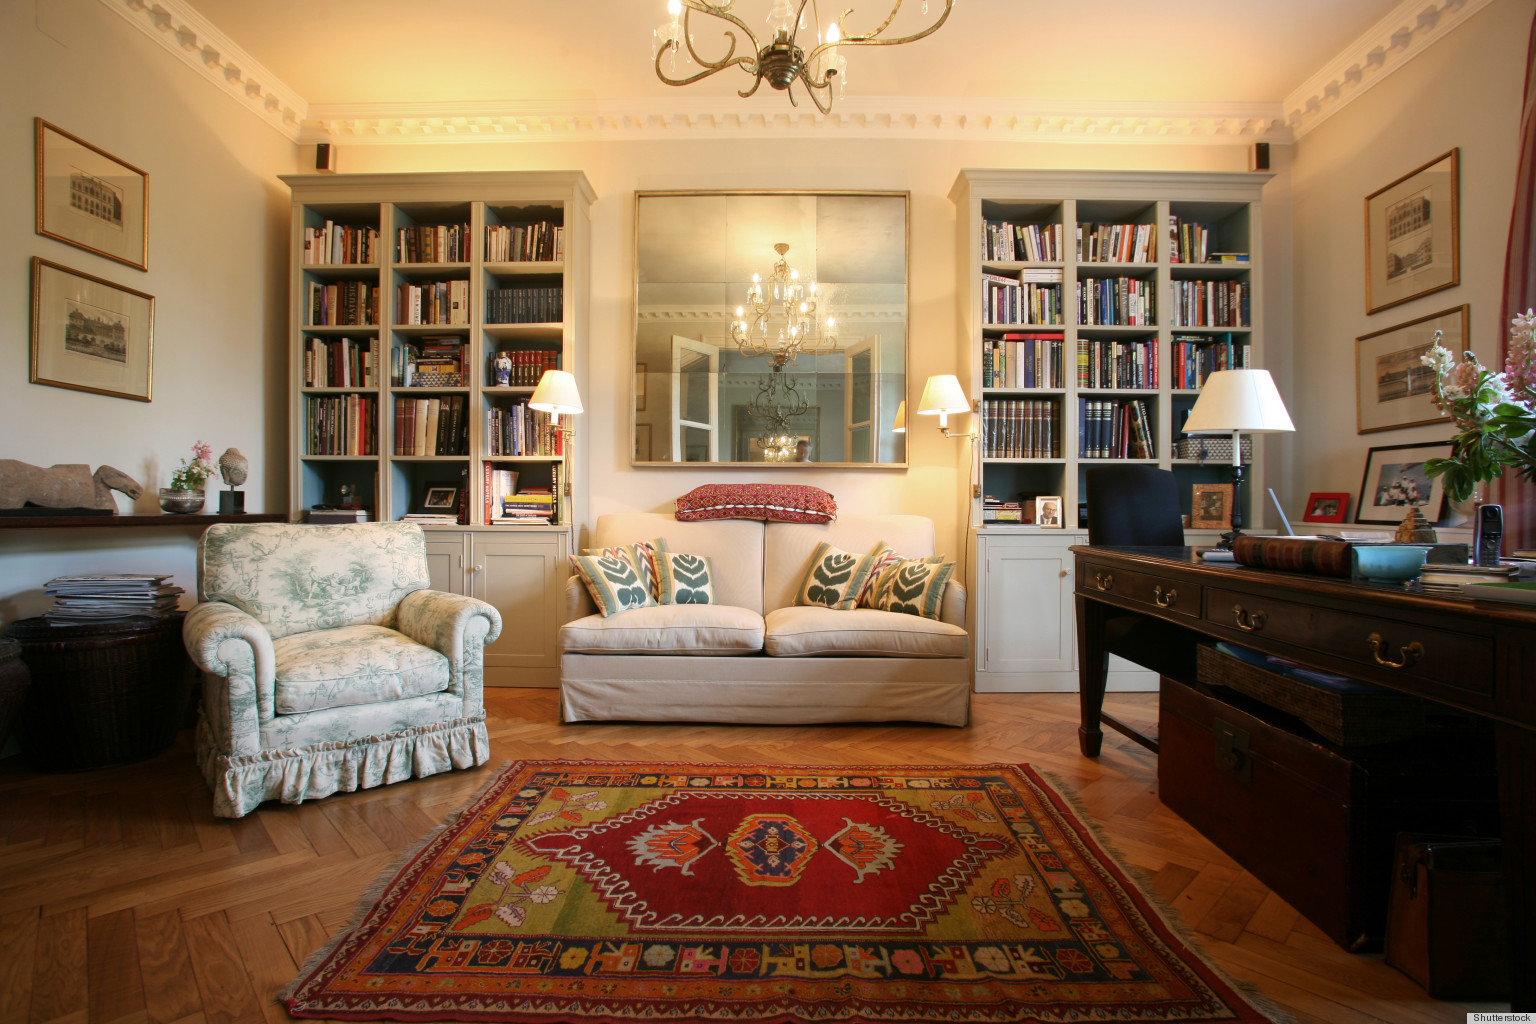 How Decorating With Books Personalizes A Home | HuffPost